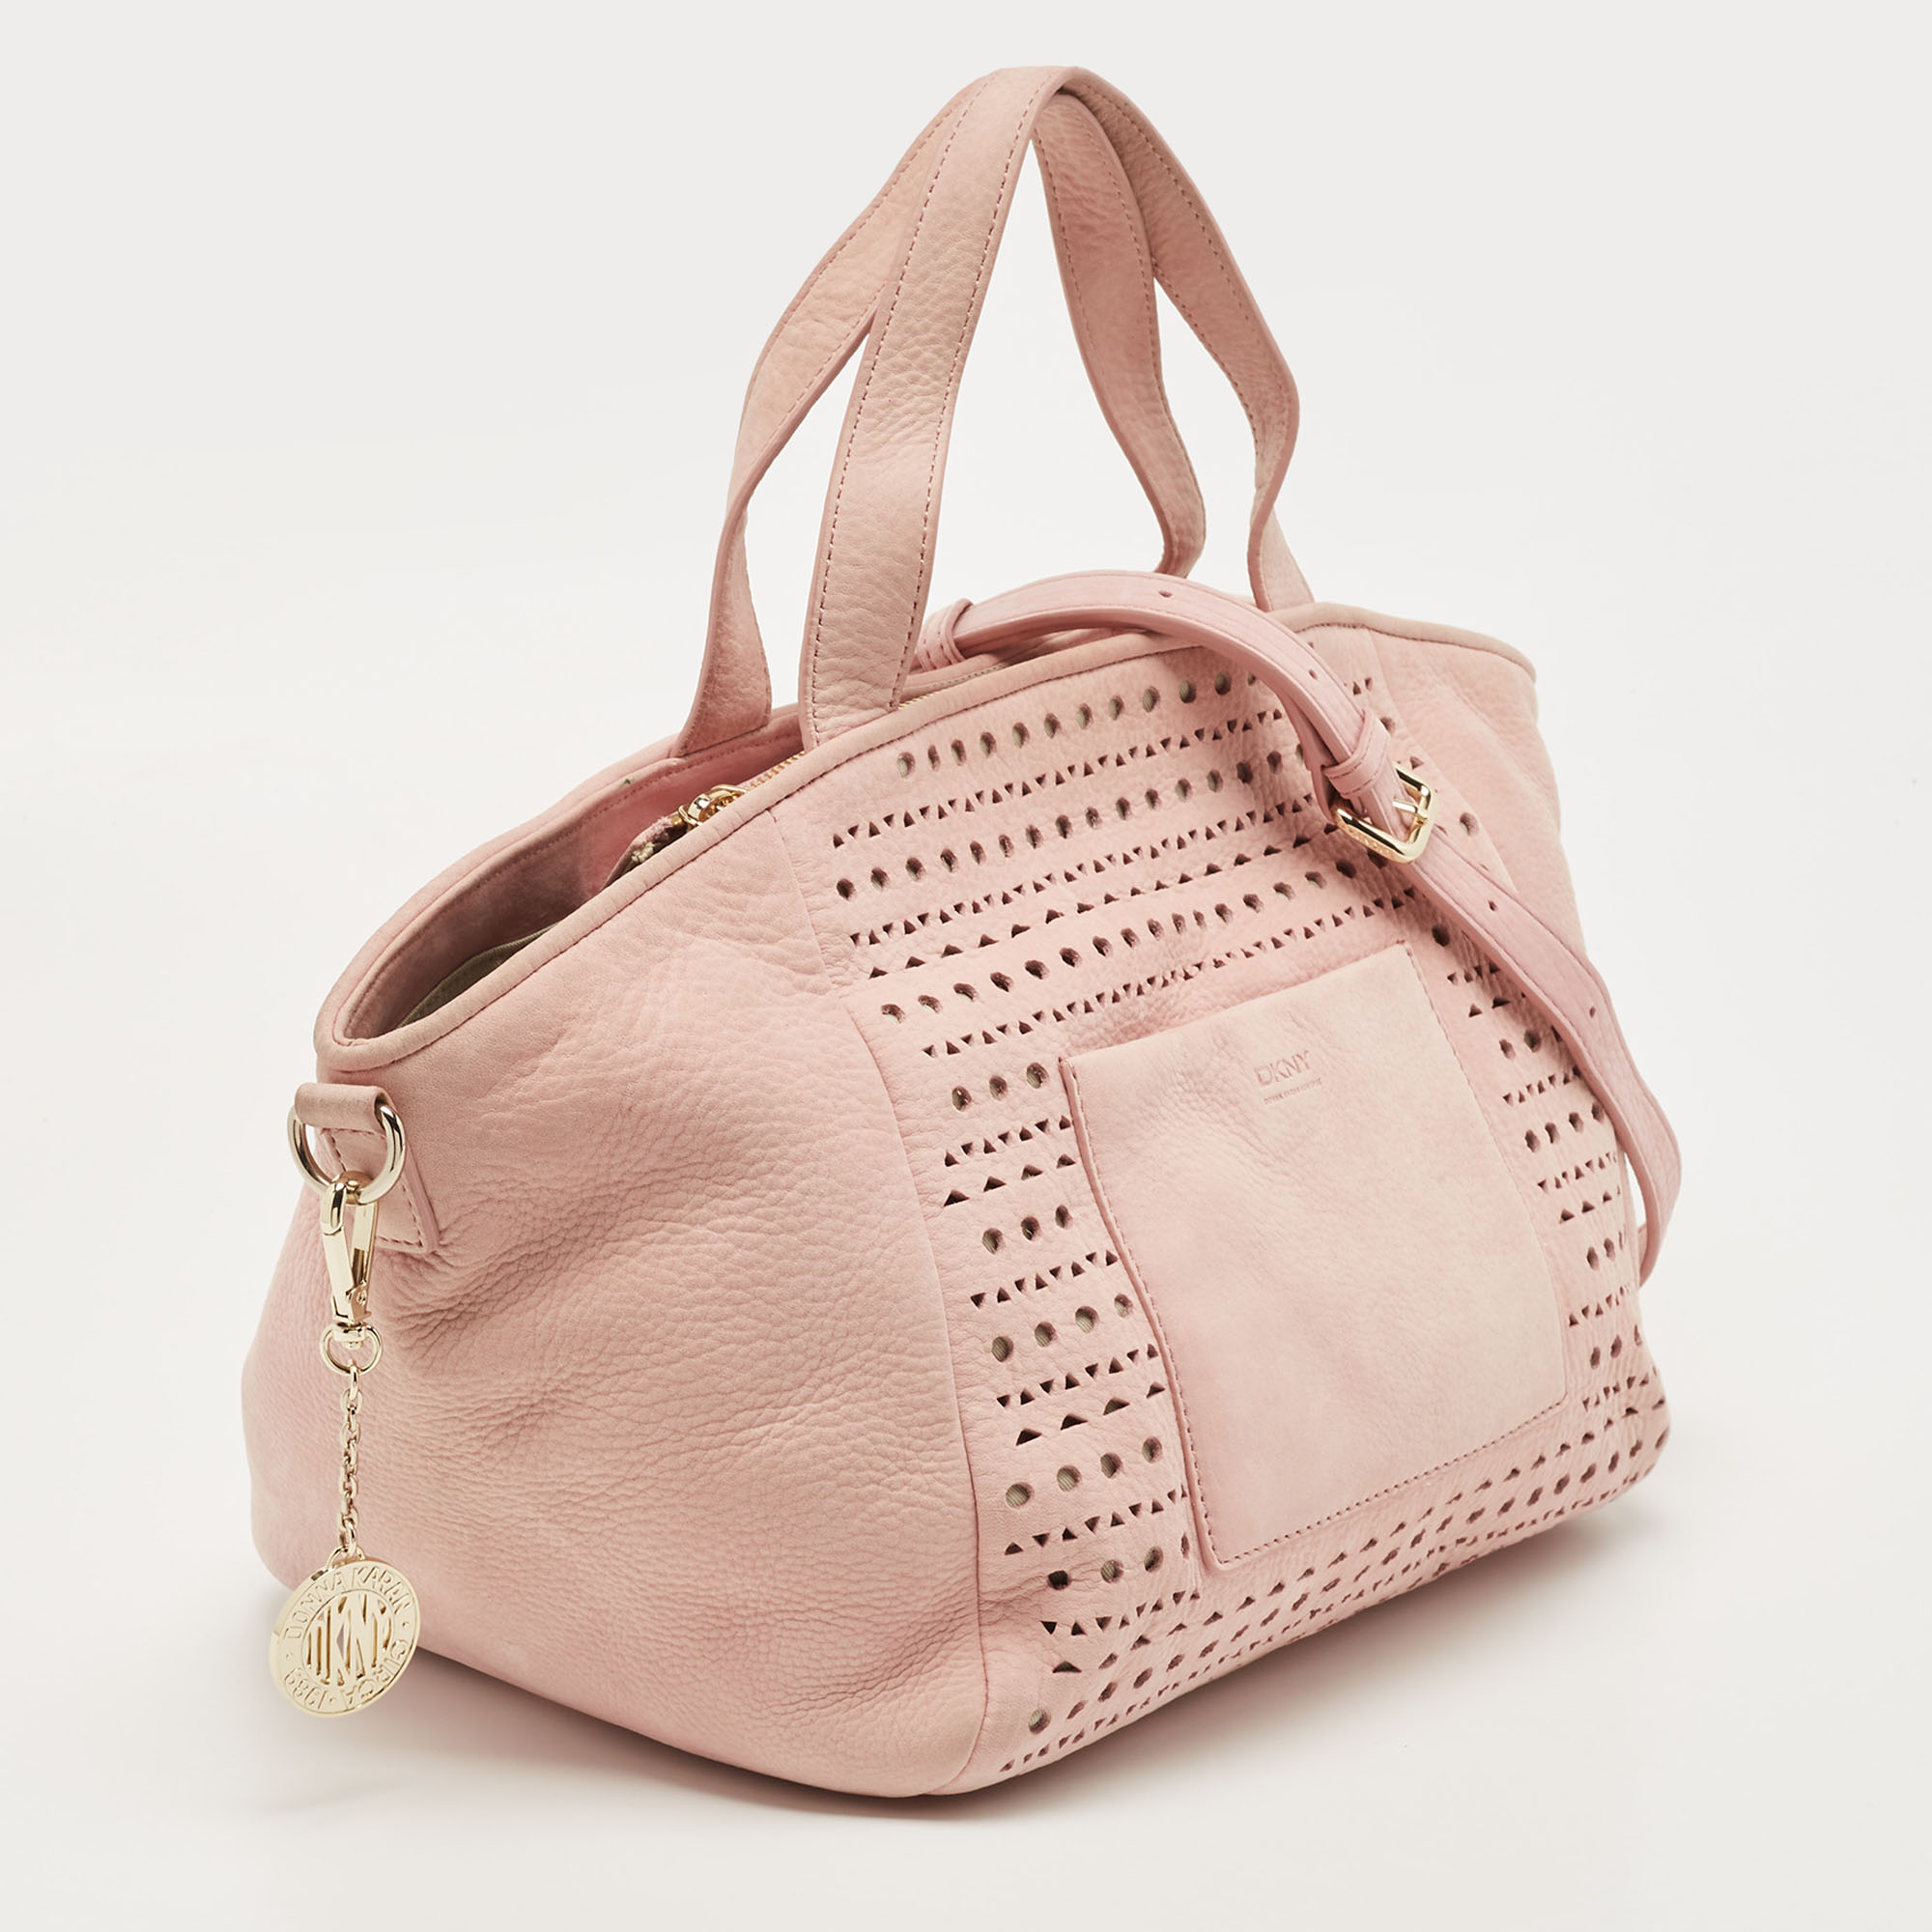 DKNY Pink Perforated Nubuck Tote